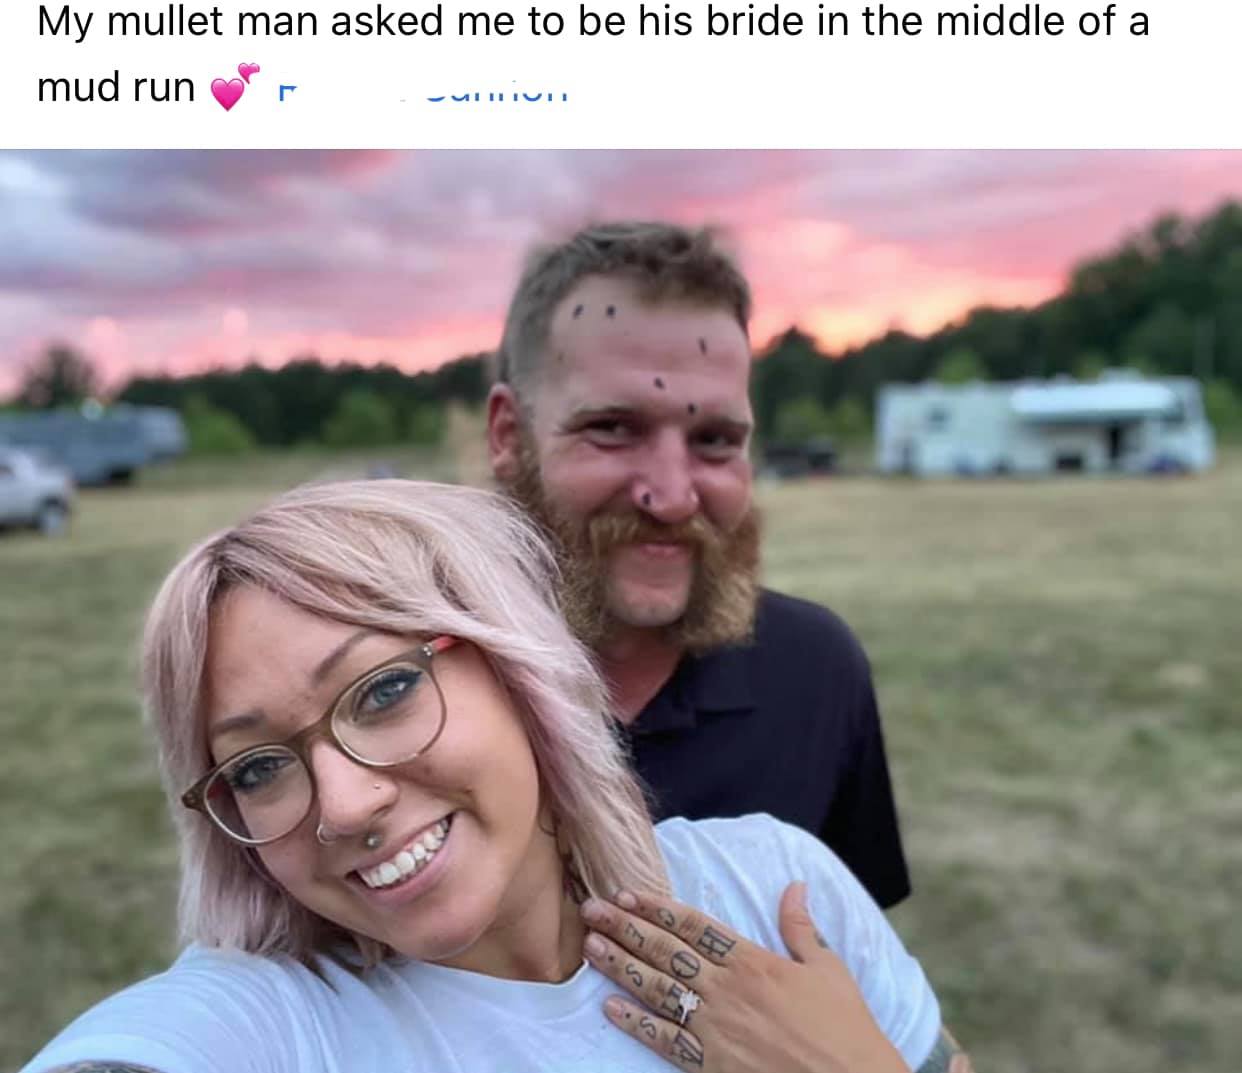 My mullet man asked me to be his bride in the middle of a mud run